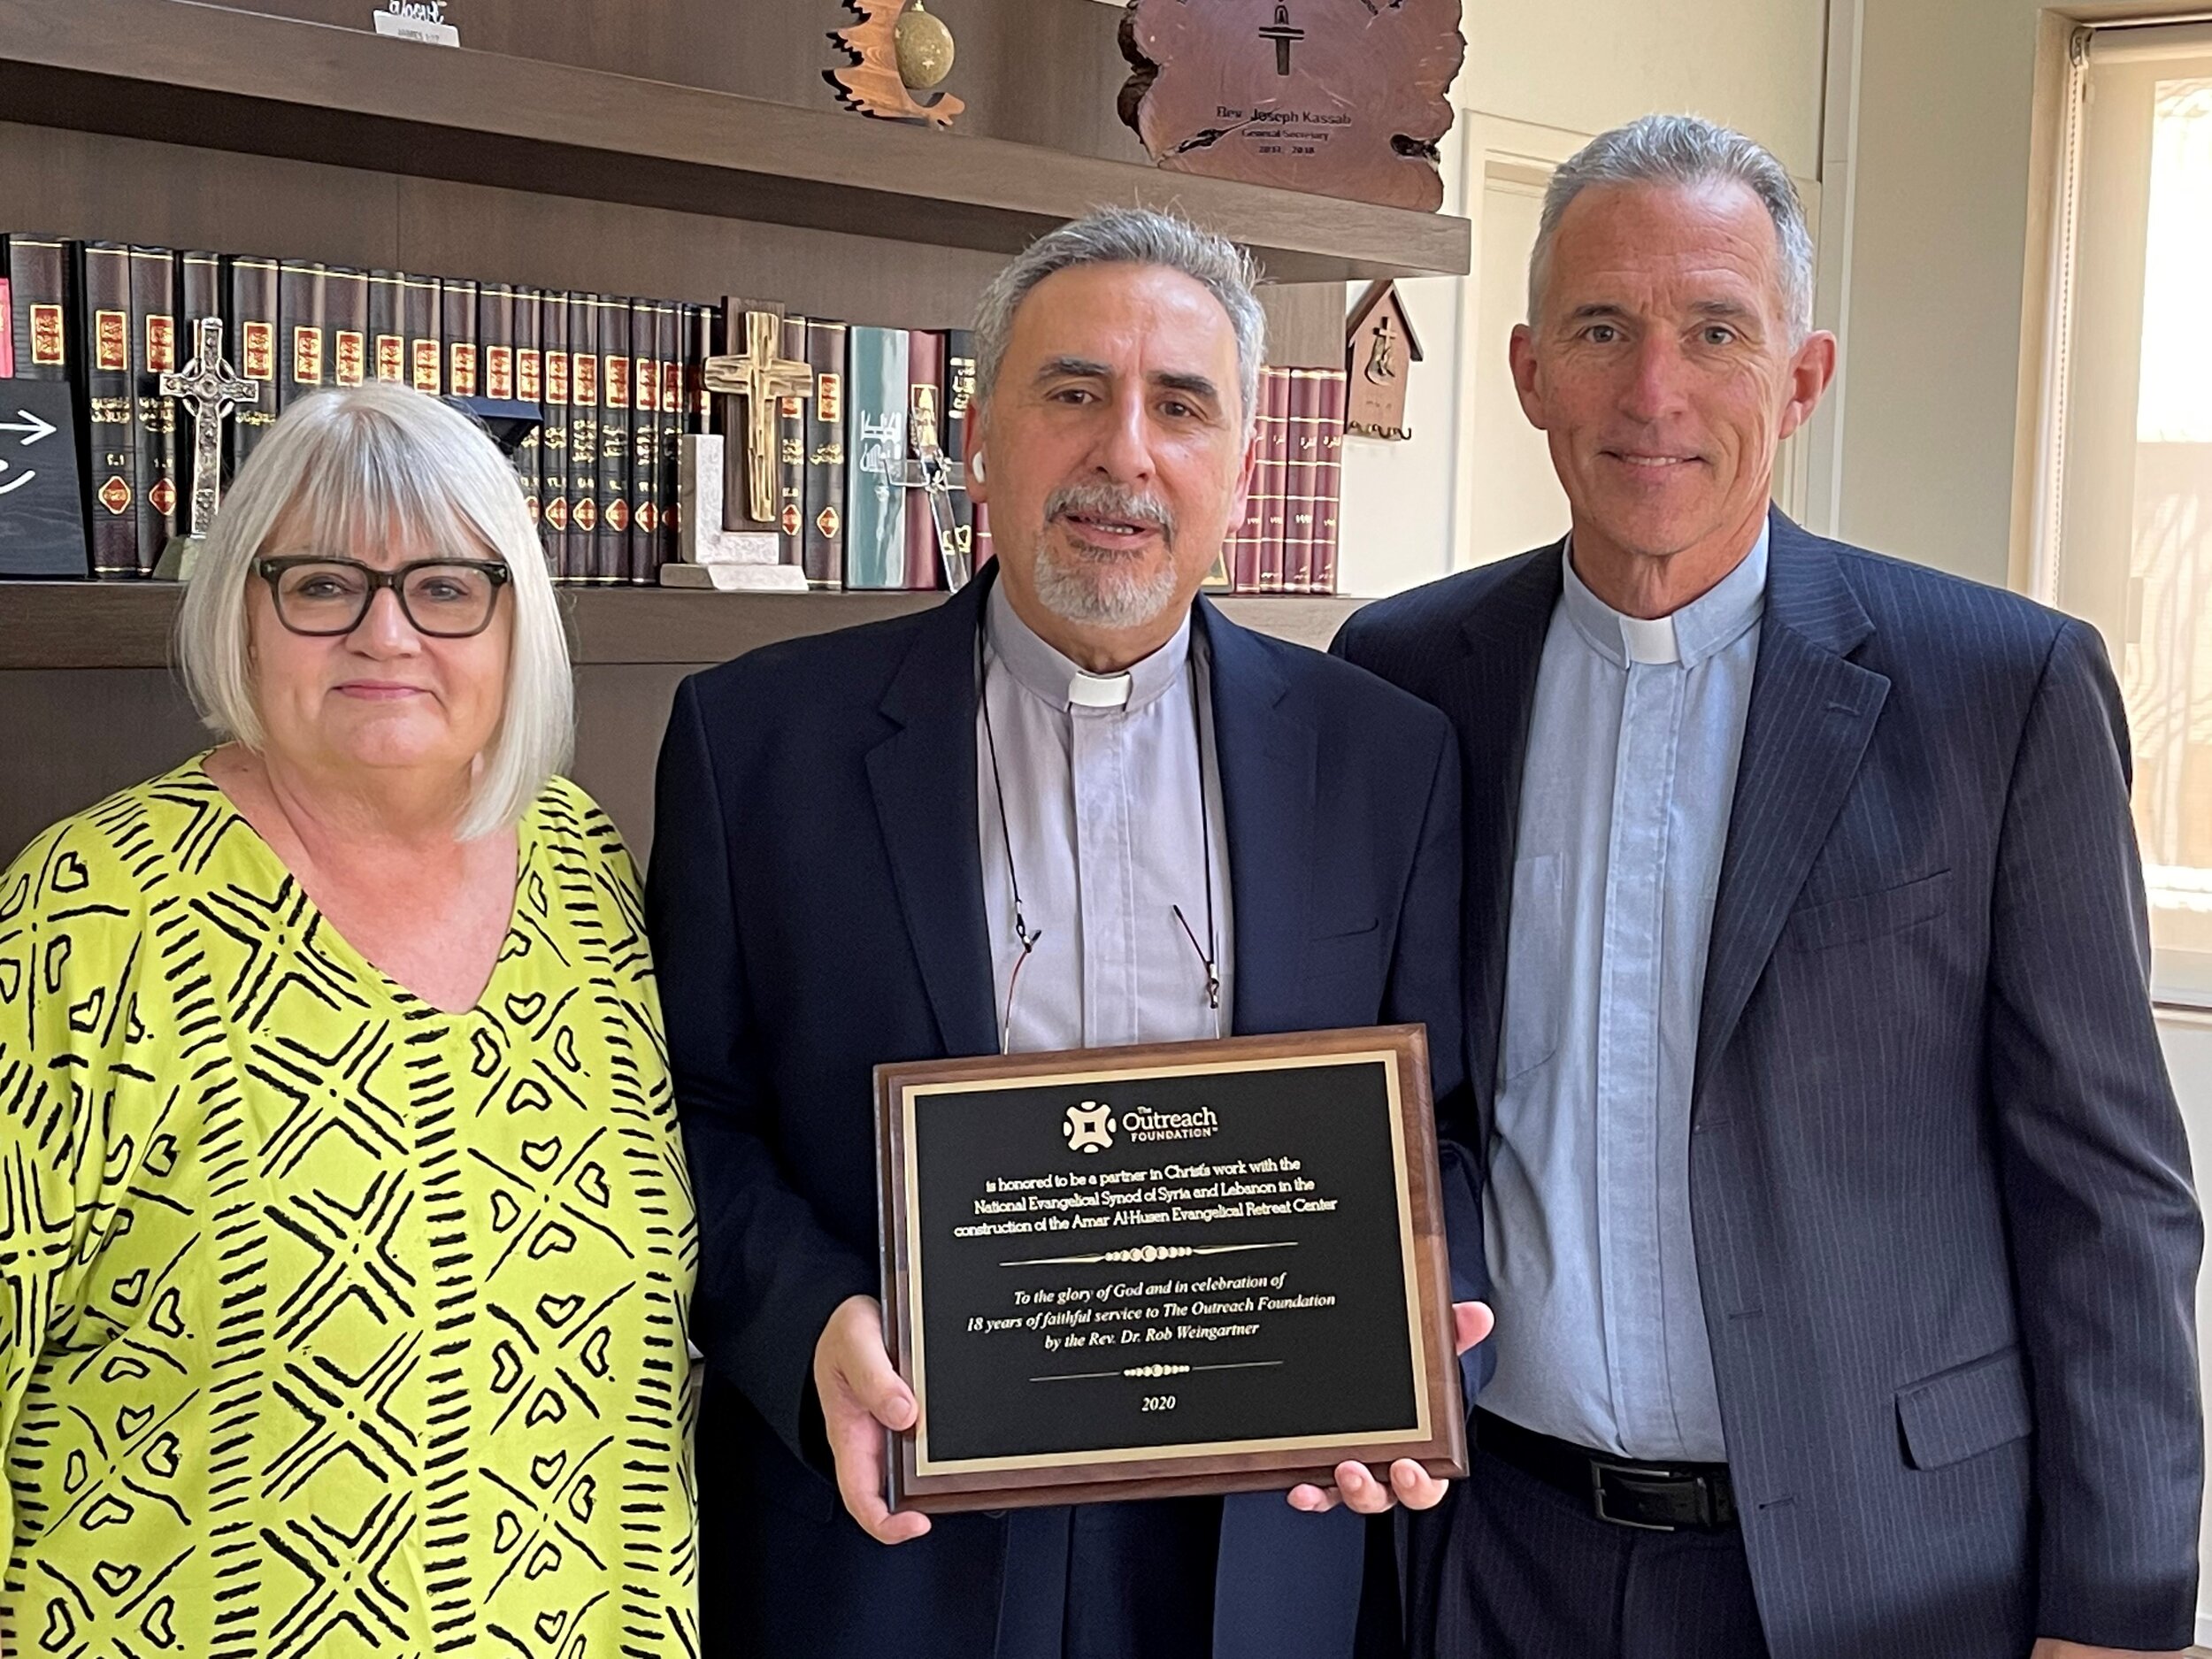  Marilyn and Mark (Outreach’s new Executive Director) present Rev. Kassab with a dedication plaque for the Retreat Center in Syria which honors Rob Weingartner, Outreach’s former Executive Director&nbsp; 